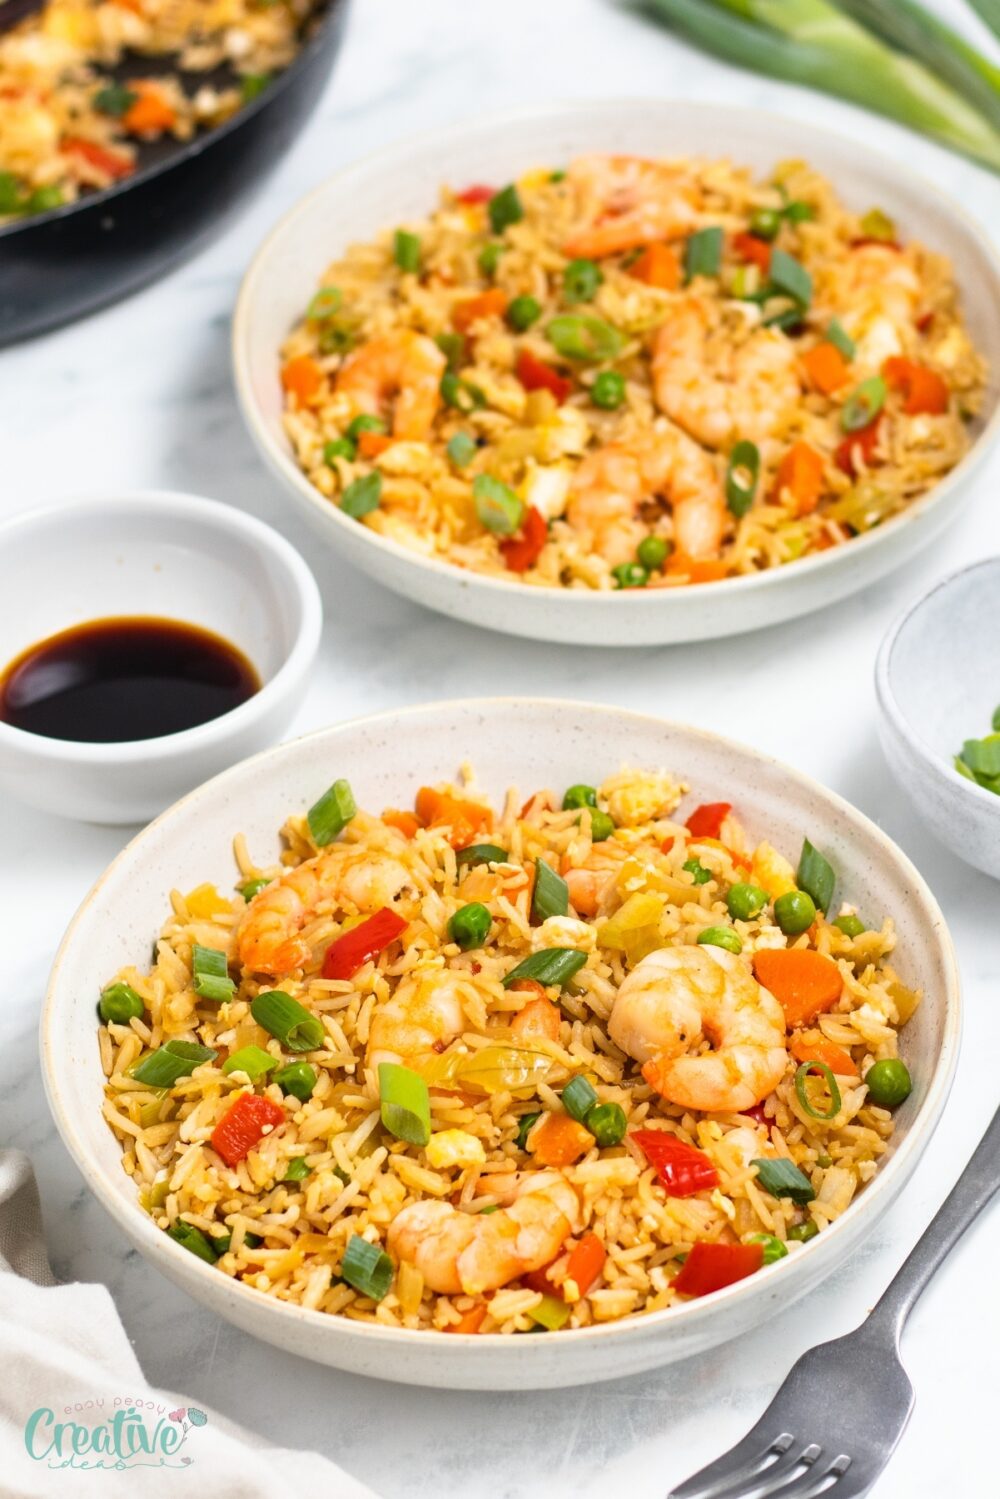 Unleash your culinary skills with this mouthwatering shrimp fried rice recipe! A delightful blend of savory shrimps, fresh veggies, and pure deliciousness.